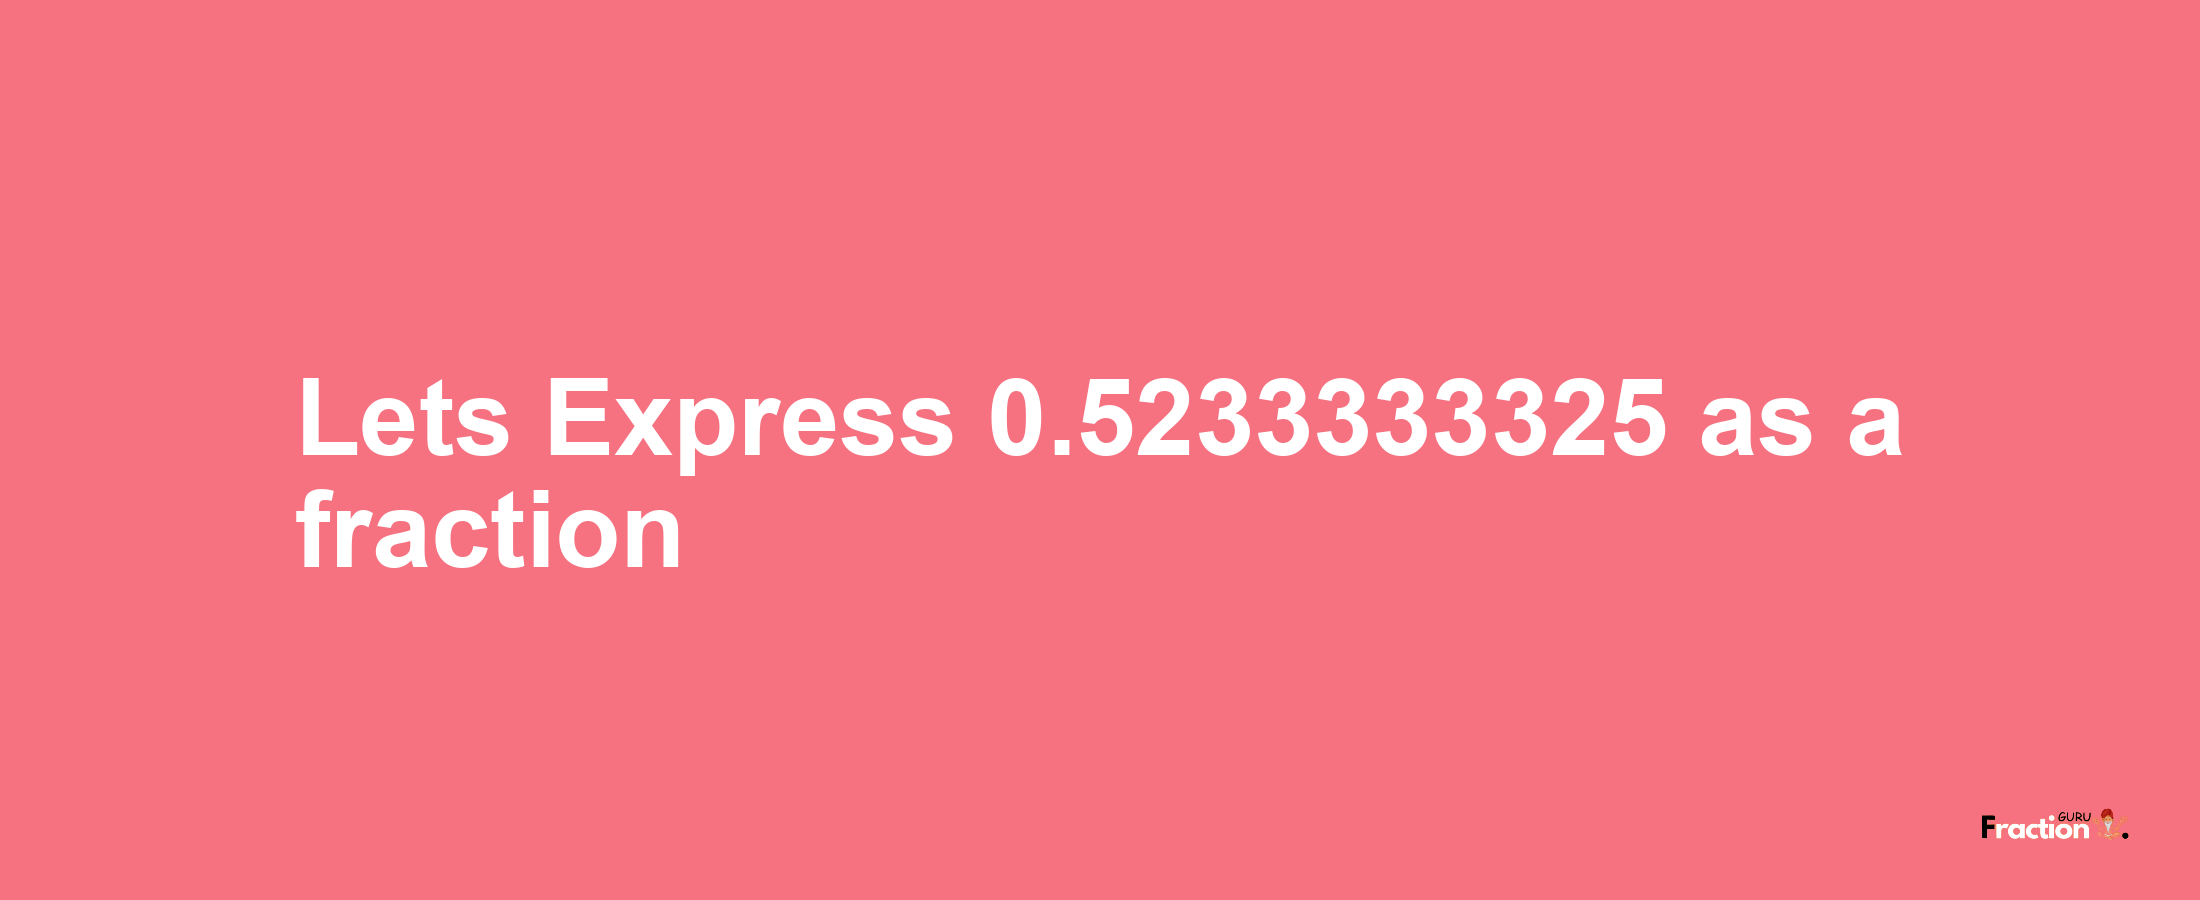 Lets Express 0.5233333325 as afraction